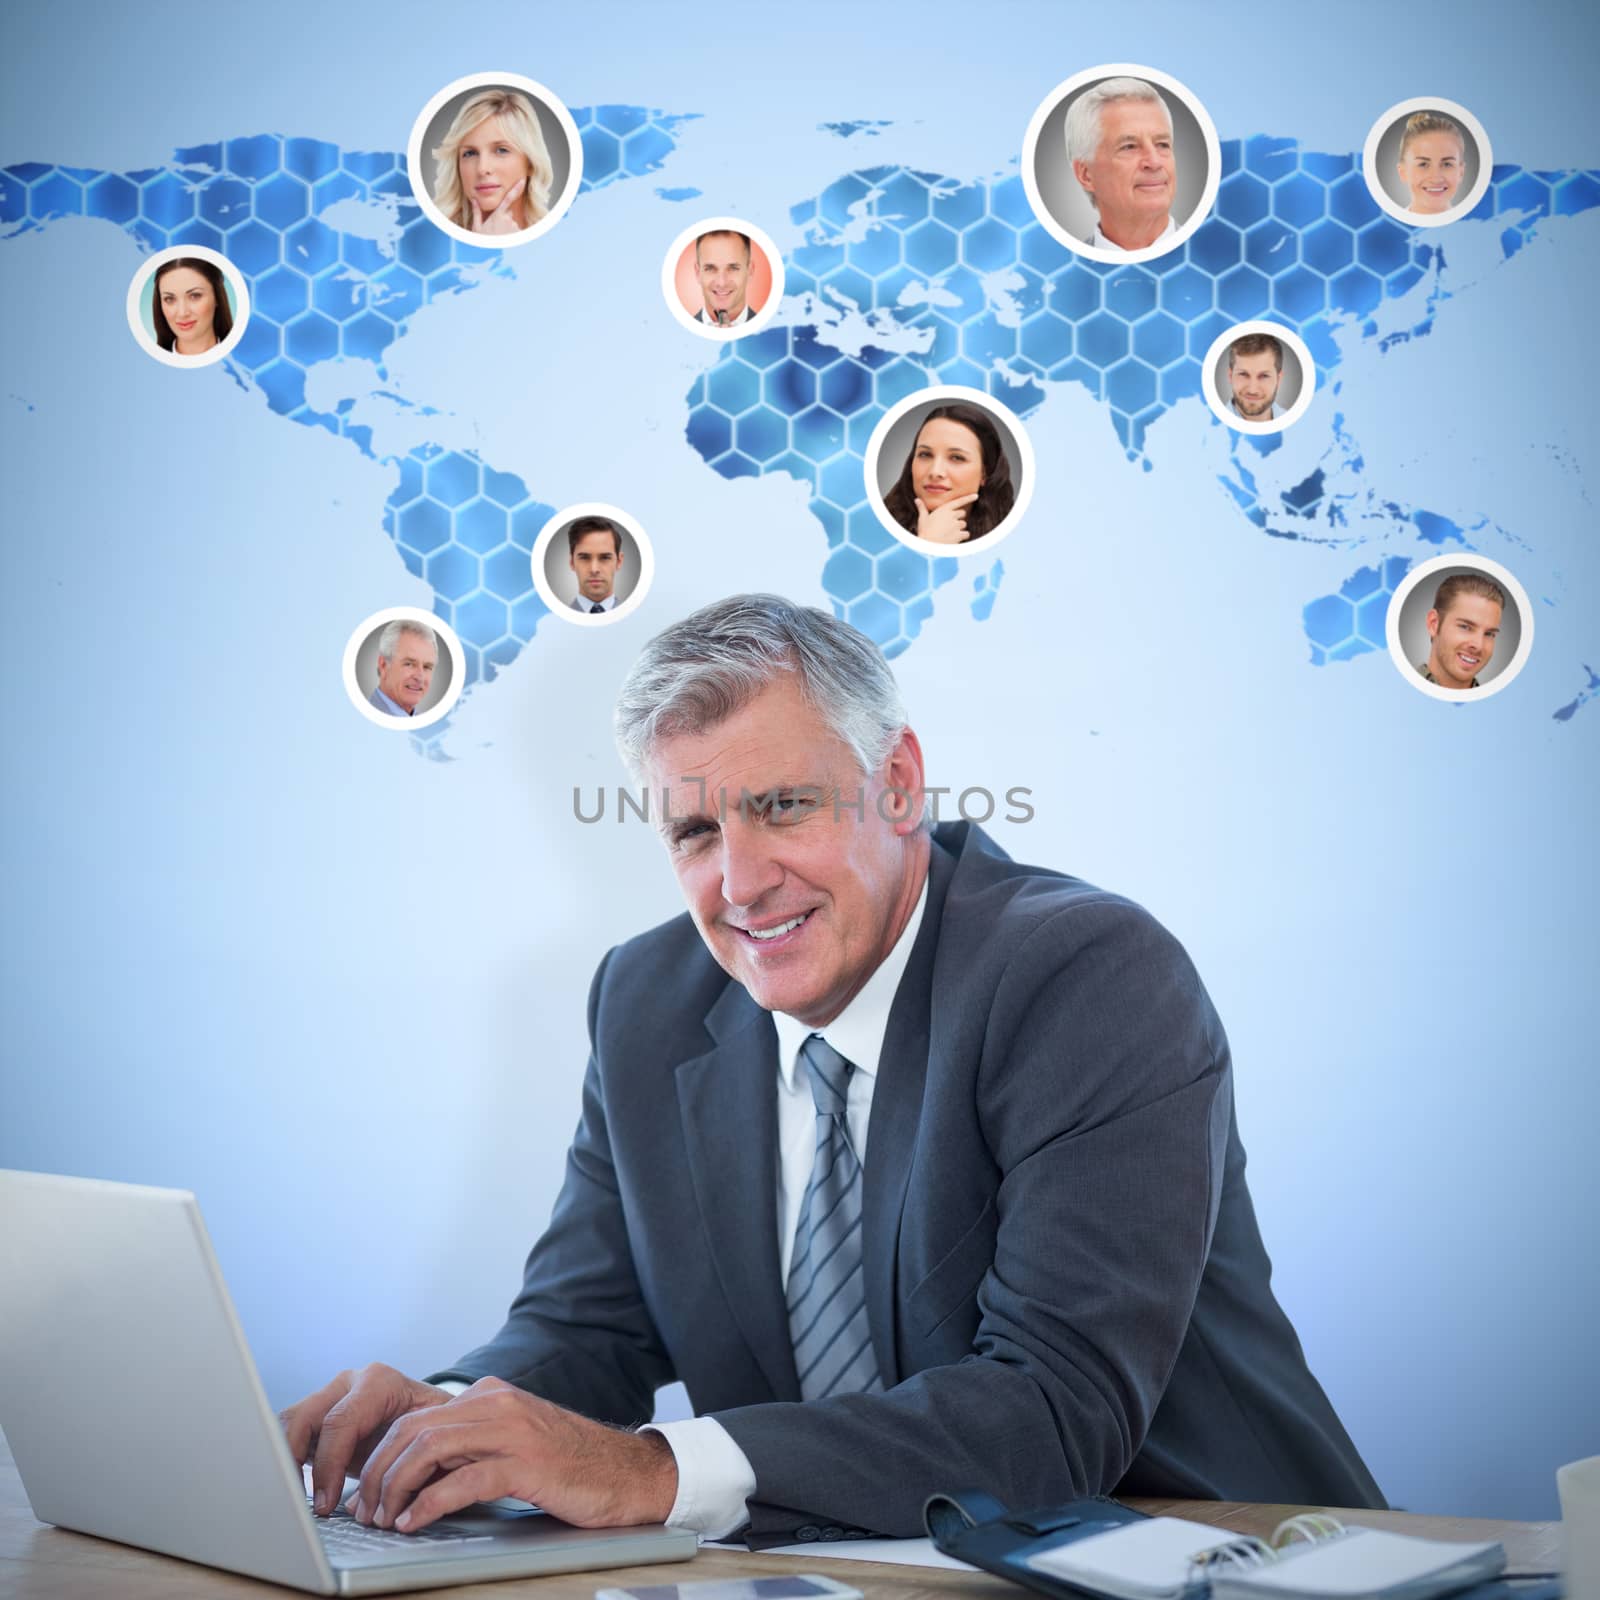 Smiling businessman working with his laptop against background with hexagons and world map